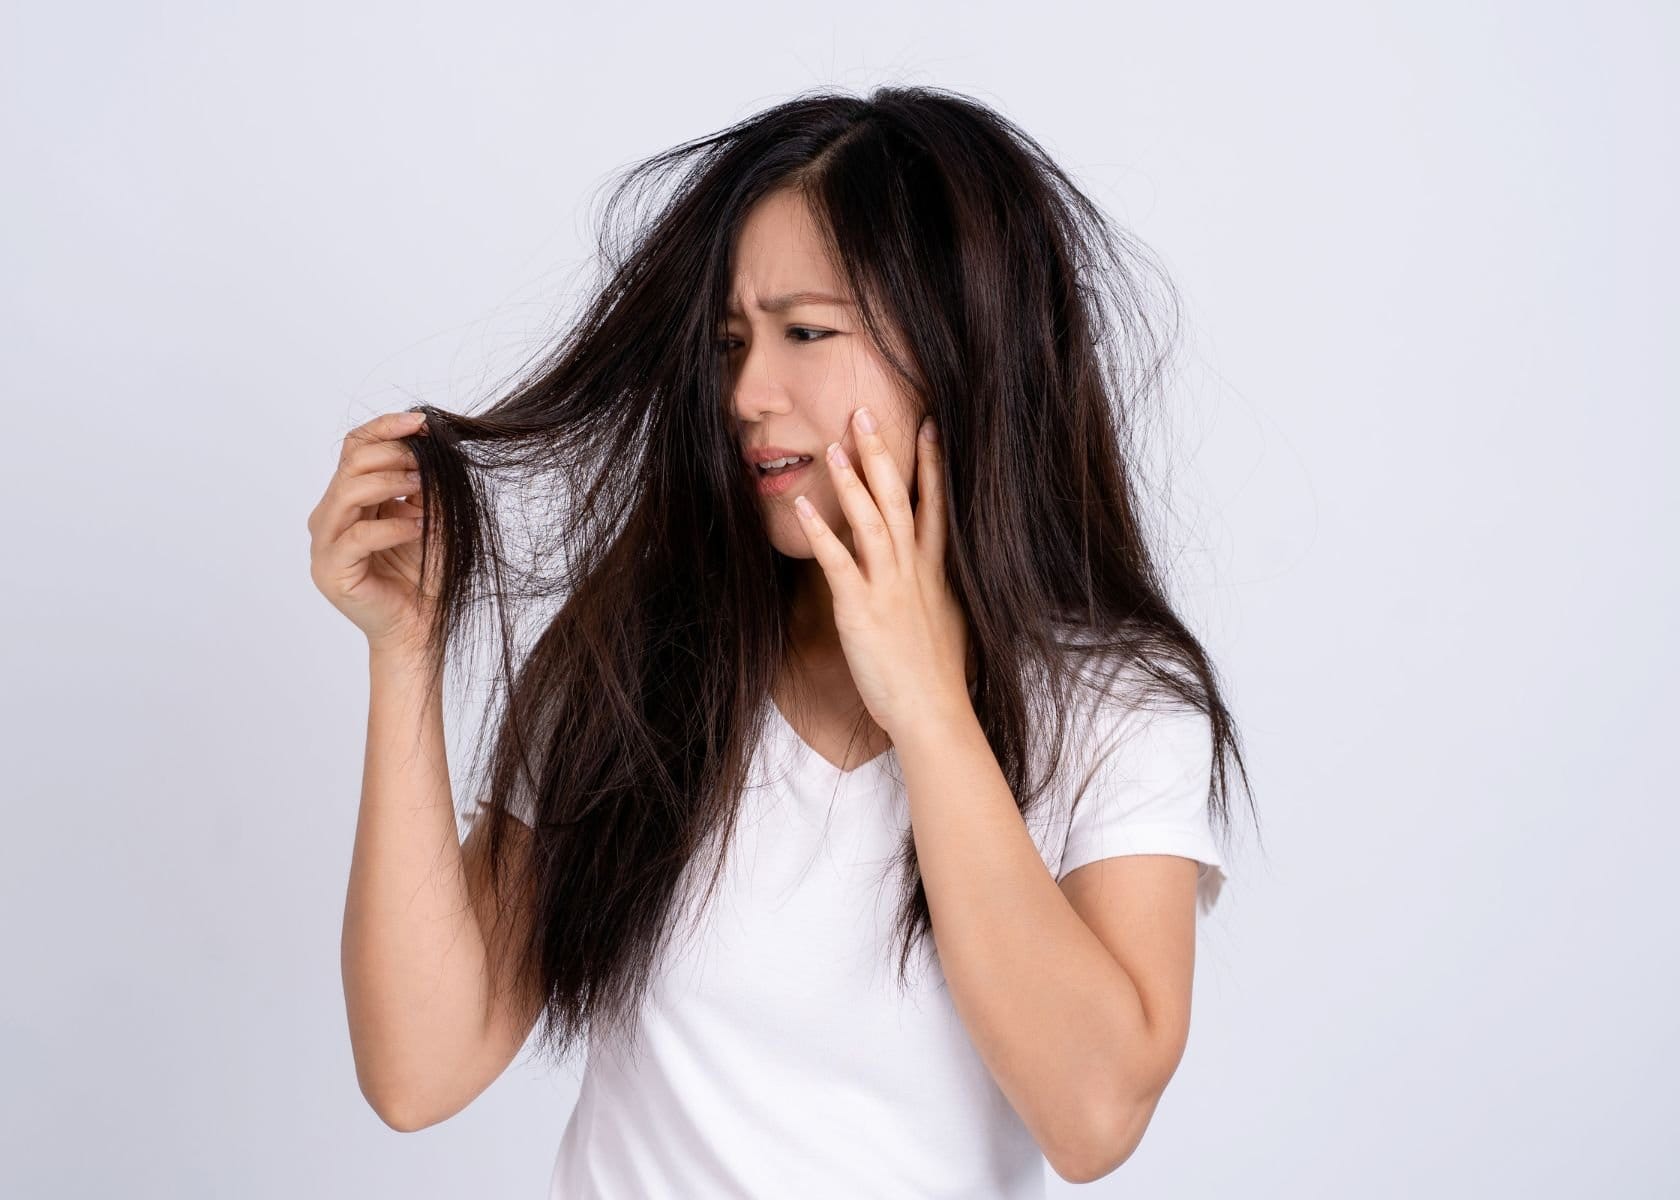 Signs of Hair Damage from Toner